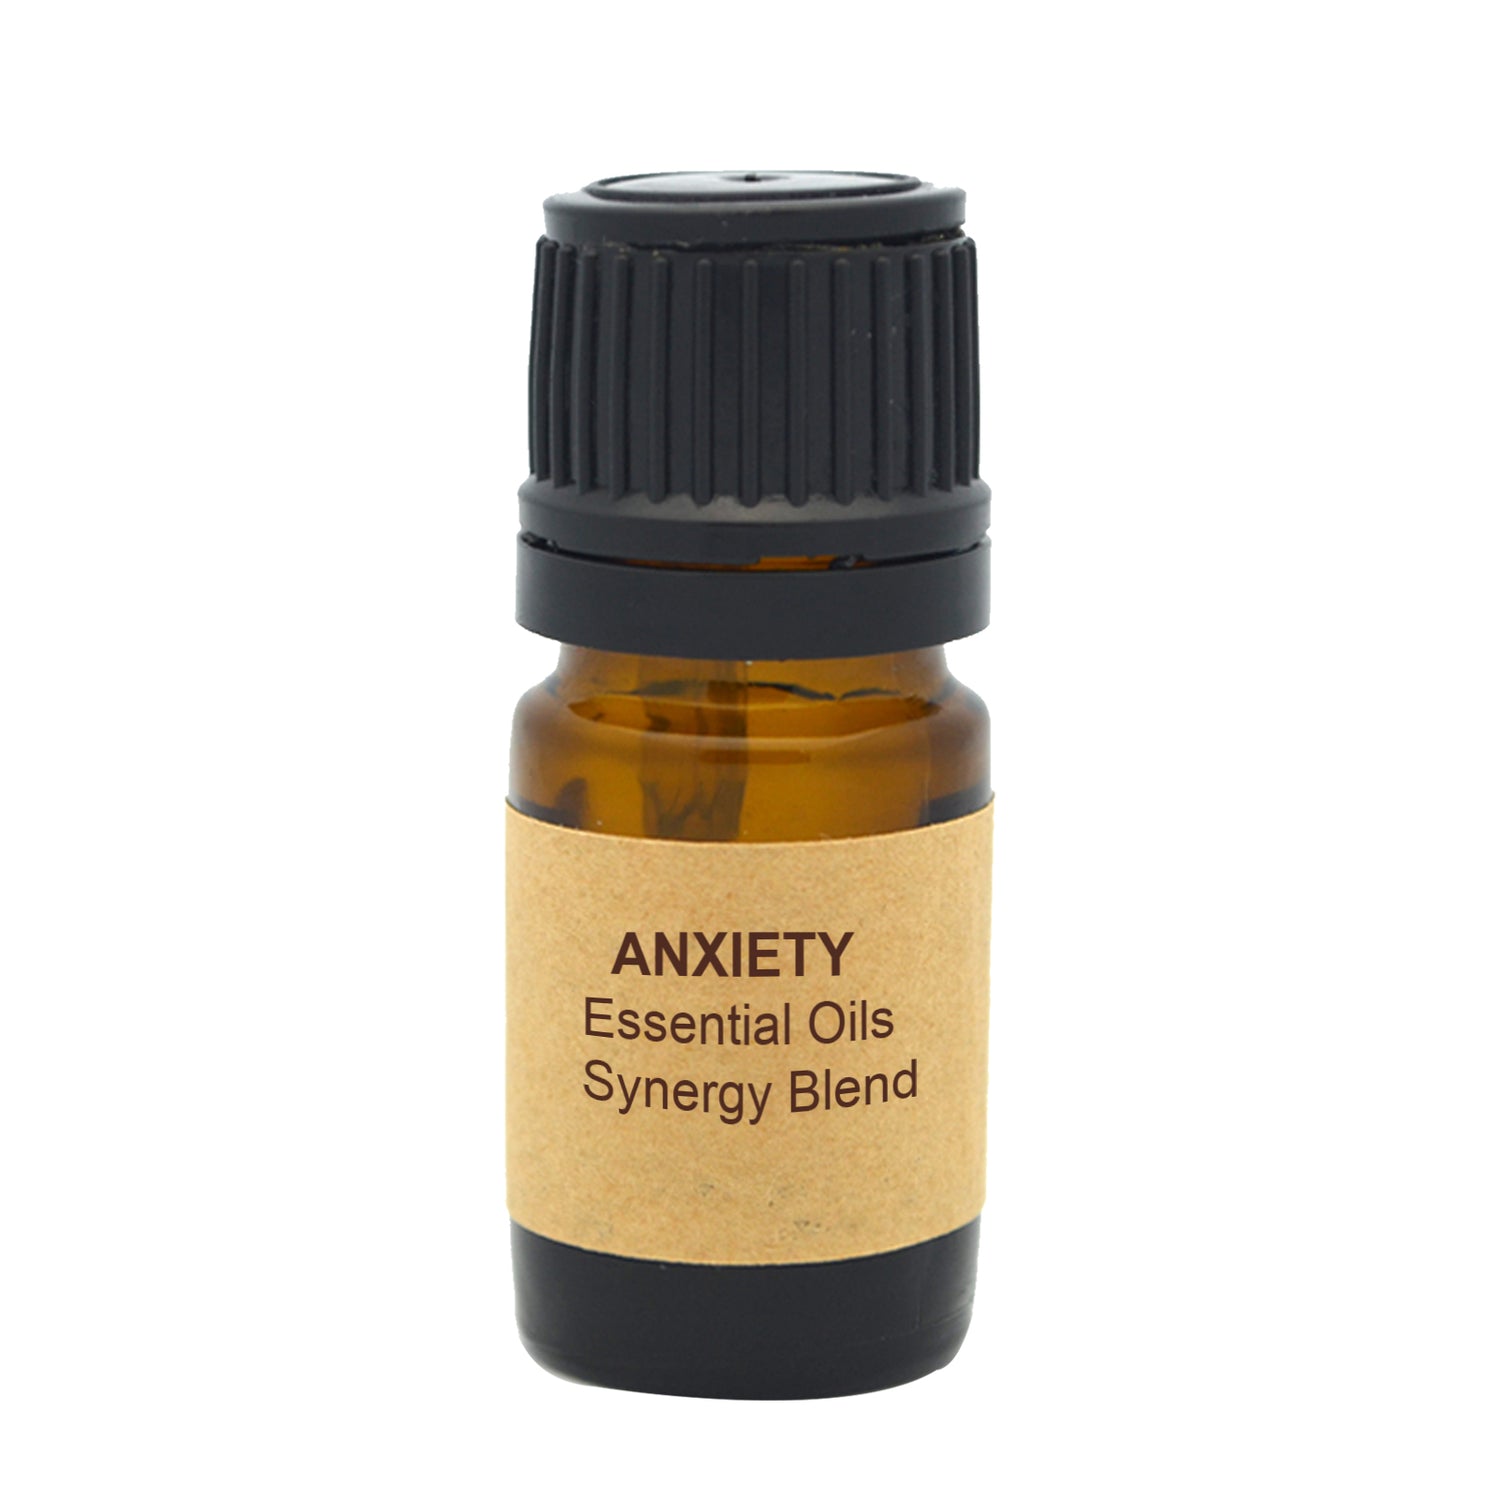 Anxiety Essential Oils Synergy Blend